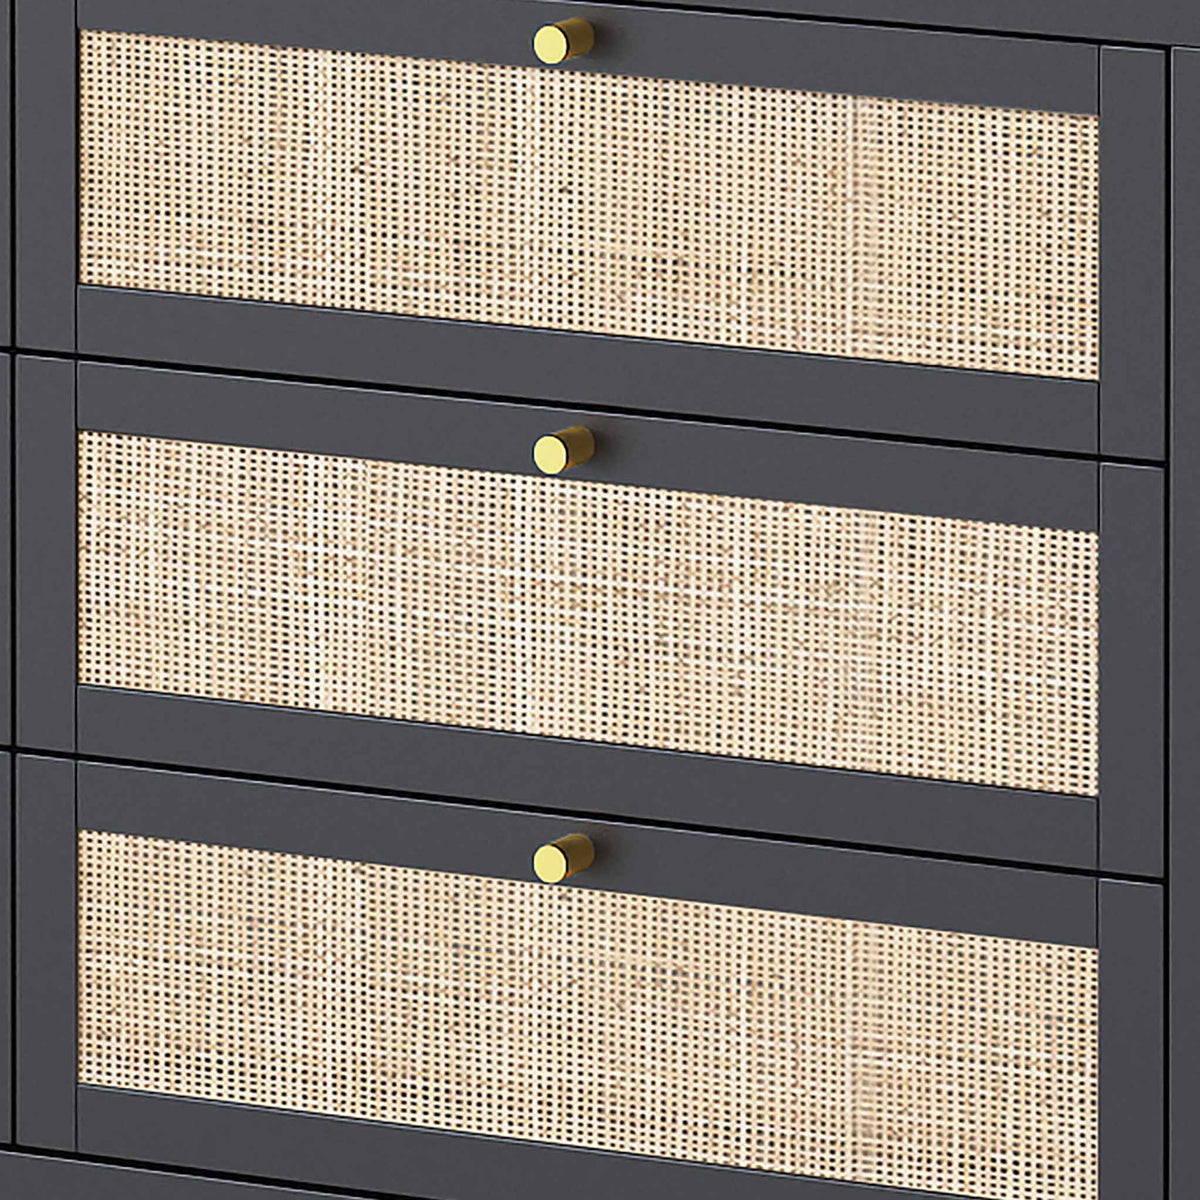 Margot Cane 6 Drawer Chest - Close up of Drawers